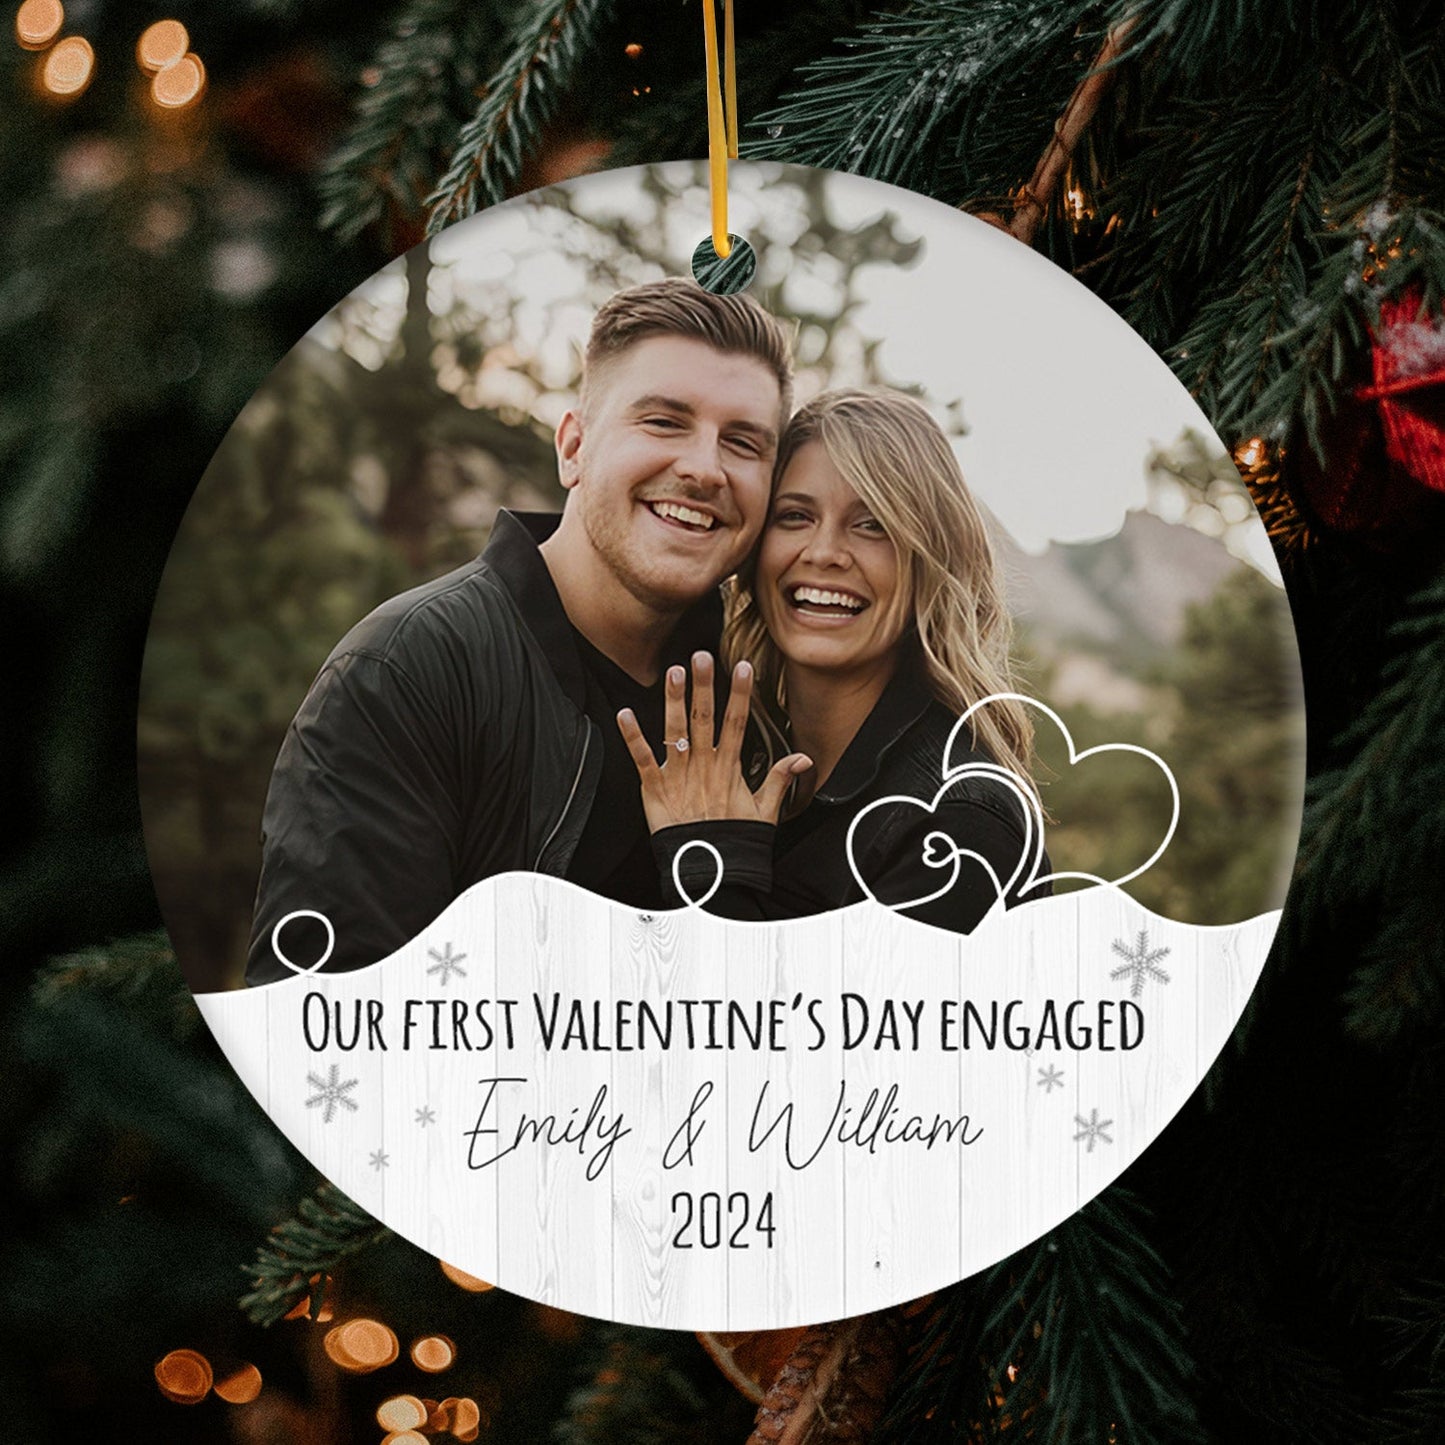 Our First Valentine's Day Engaged - Personalized First Valentine's Day gift For Fiance - Custom Circle Ceramic Ornament - MyMindfulGifts